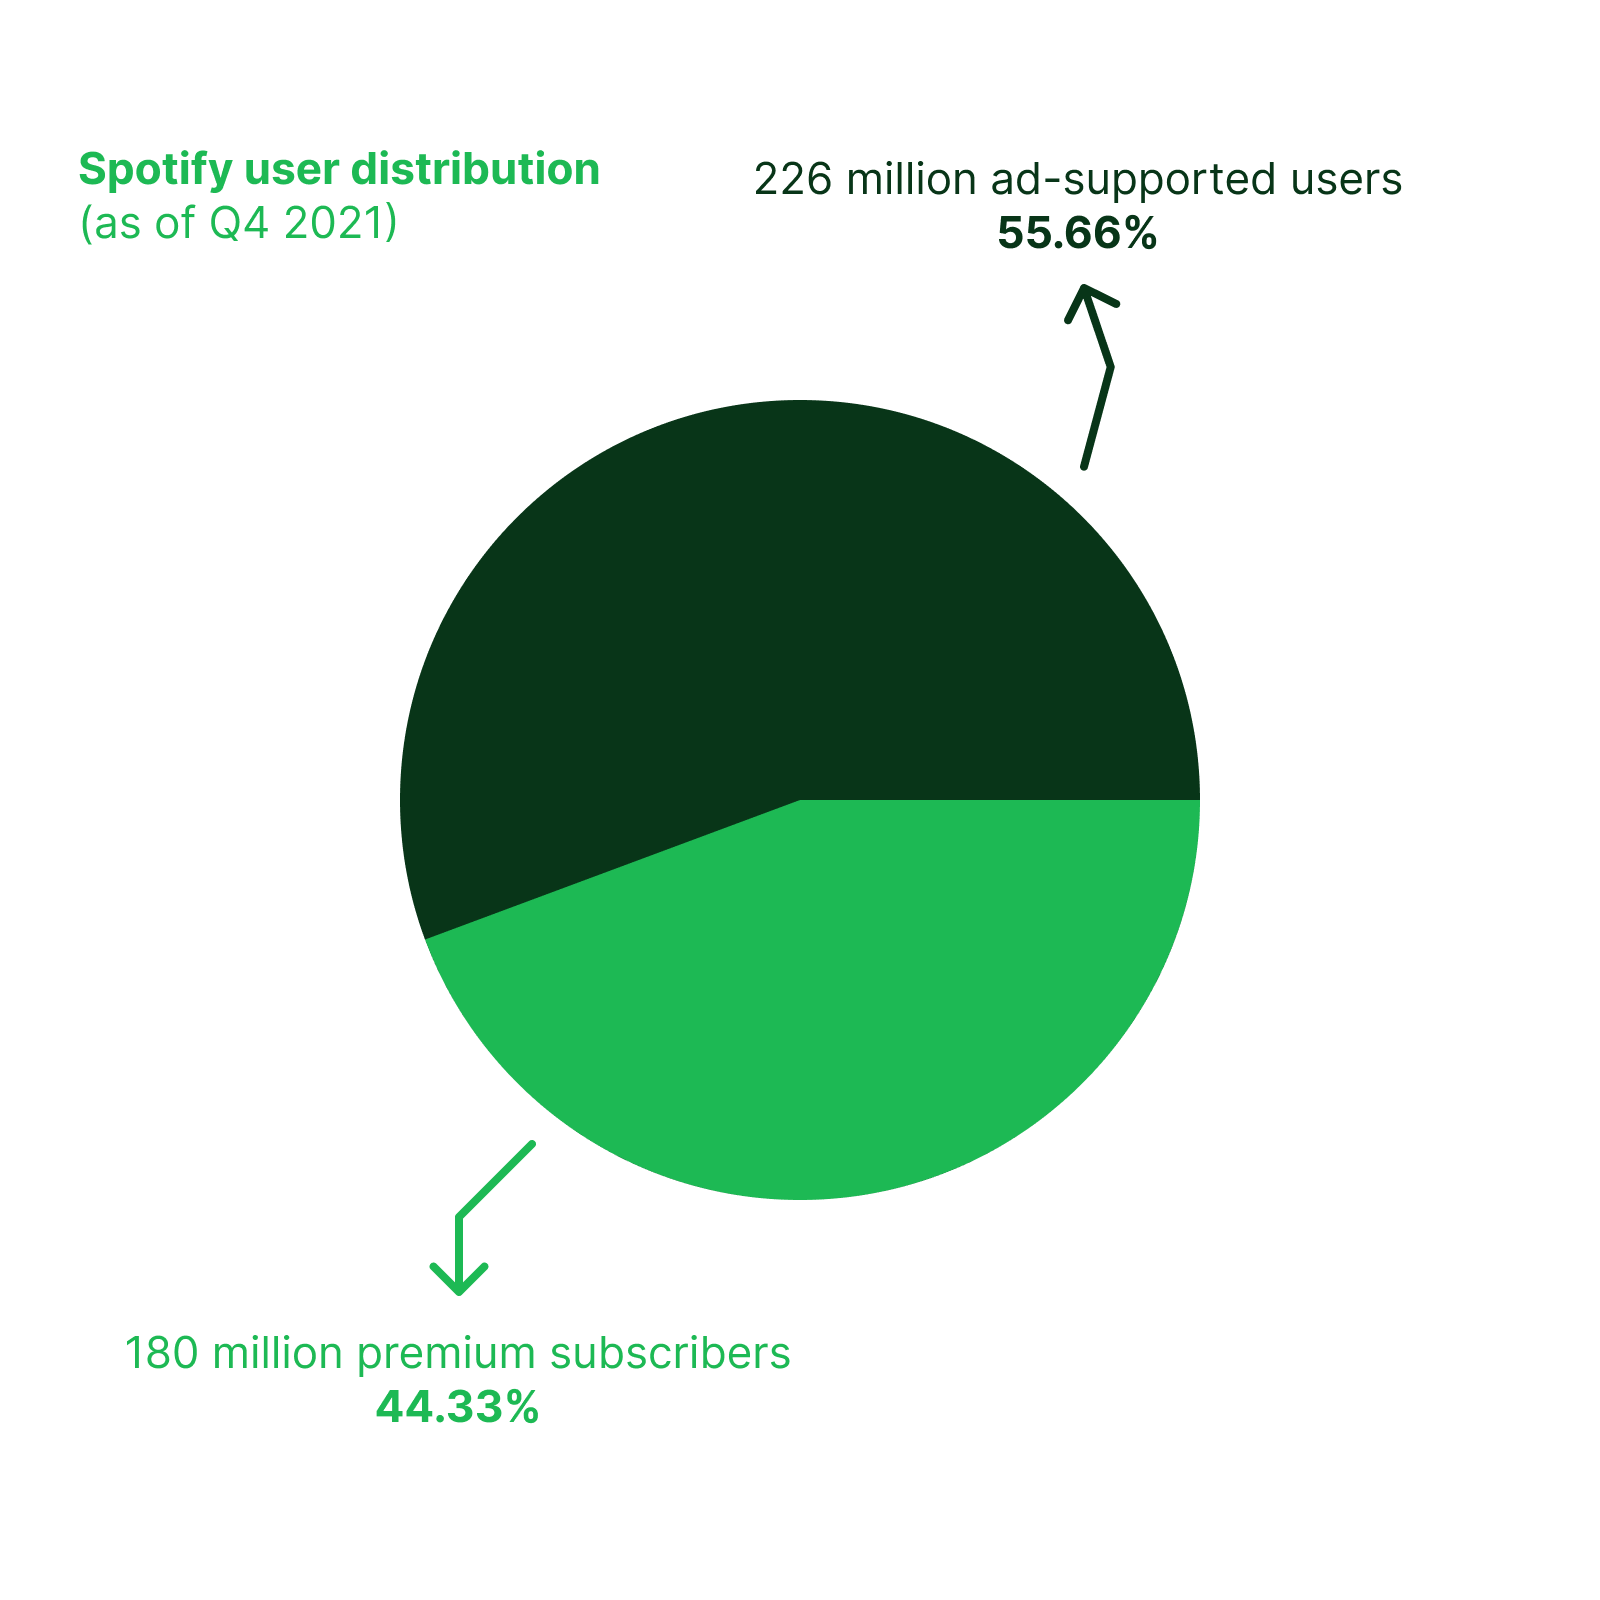 Pie chart of distribution between premium and ad-supported Spotify users